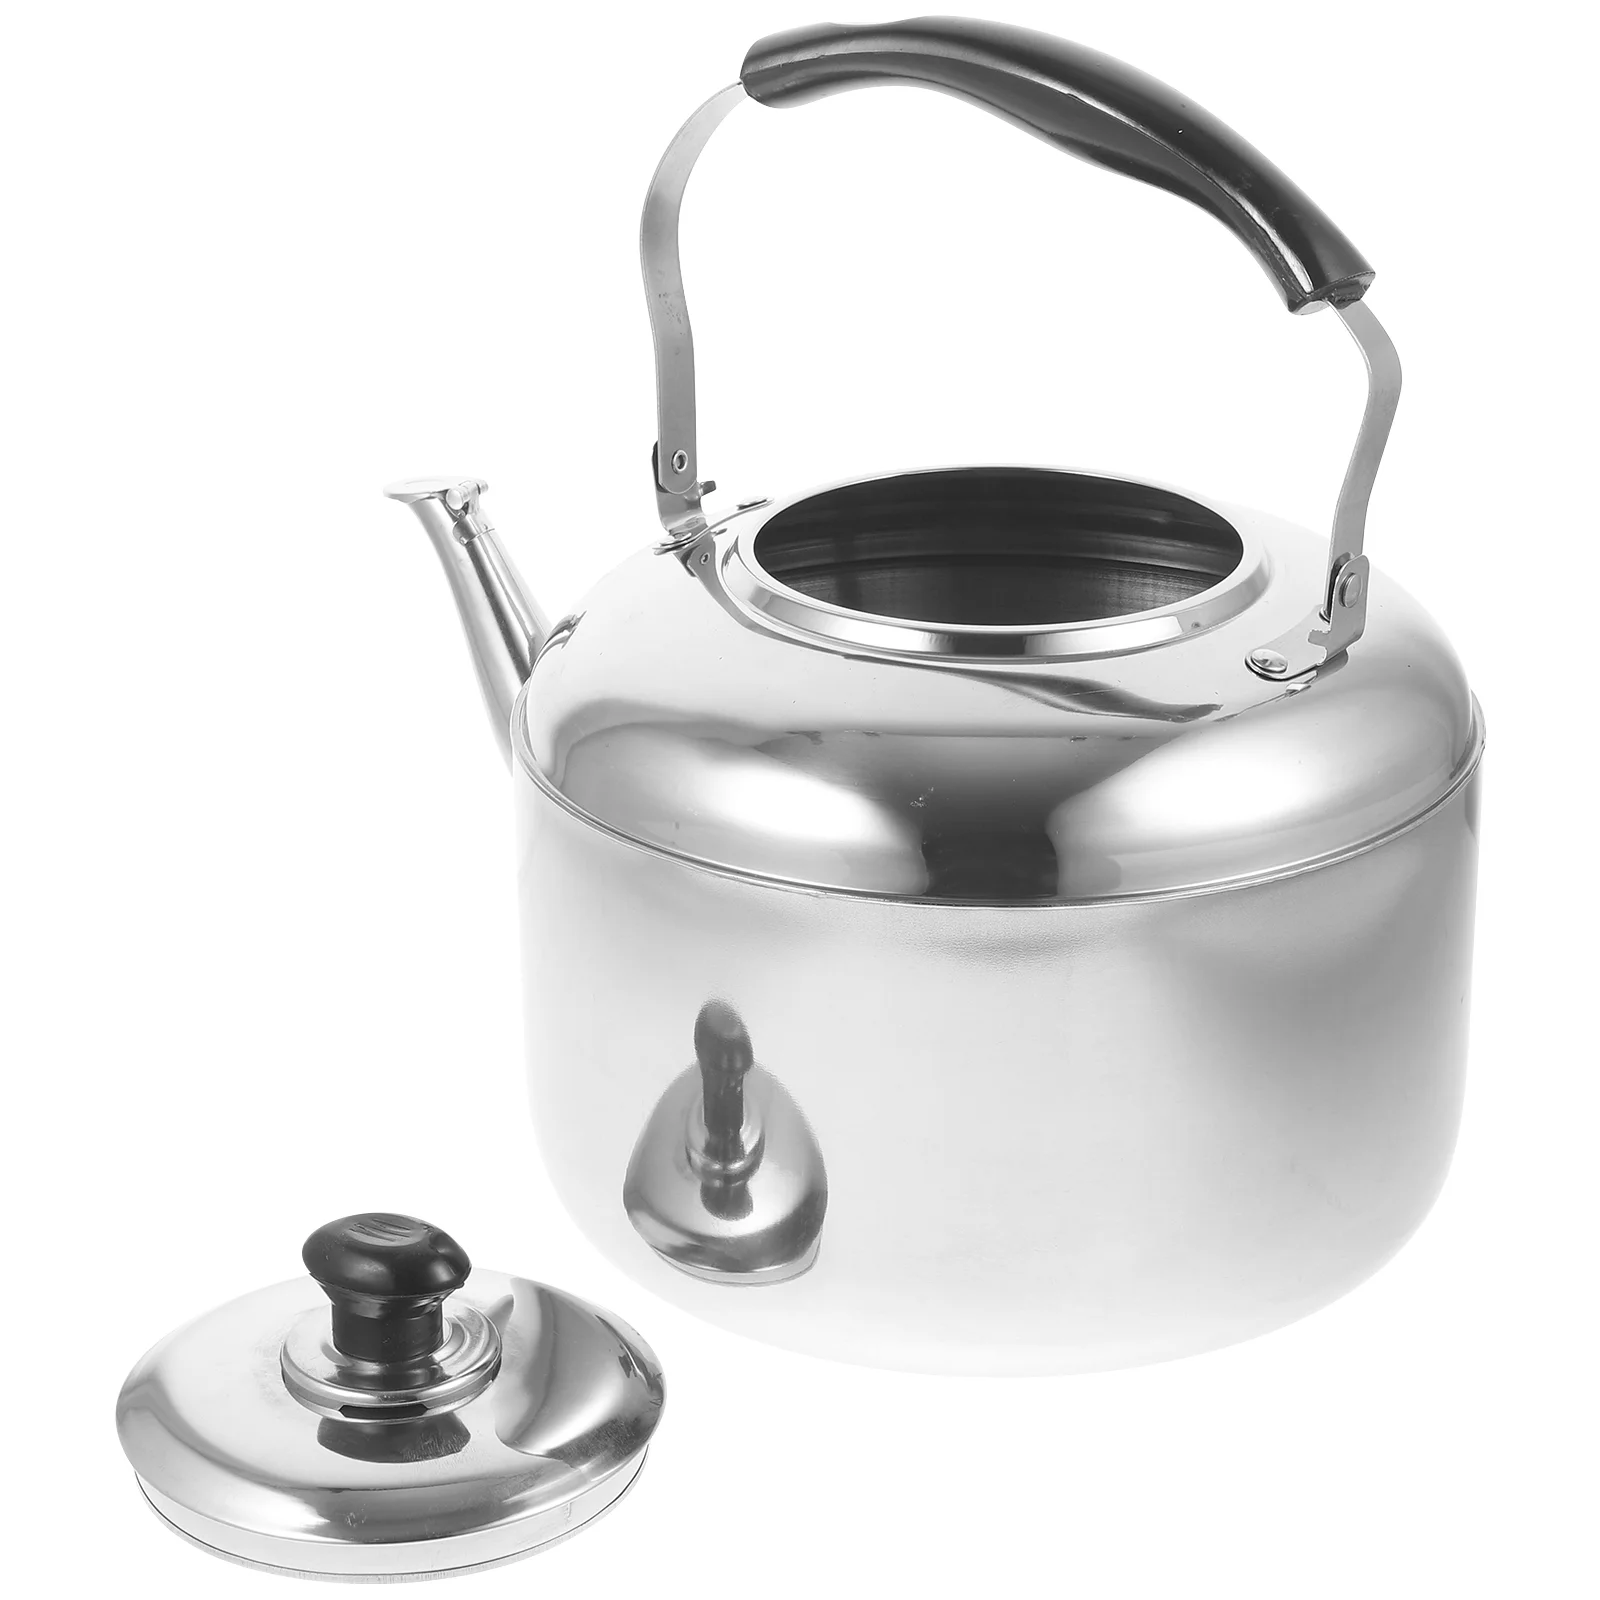 

Kettle Water Tea Pot Teapot Steel Whistling Stovetop Stove Stainless Hot Boil Large Kettles Hanging Coffee Sounding Capacity